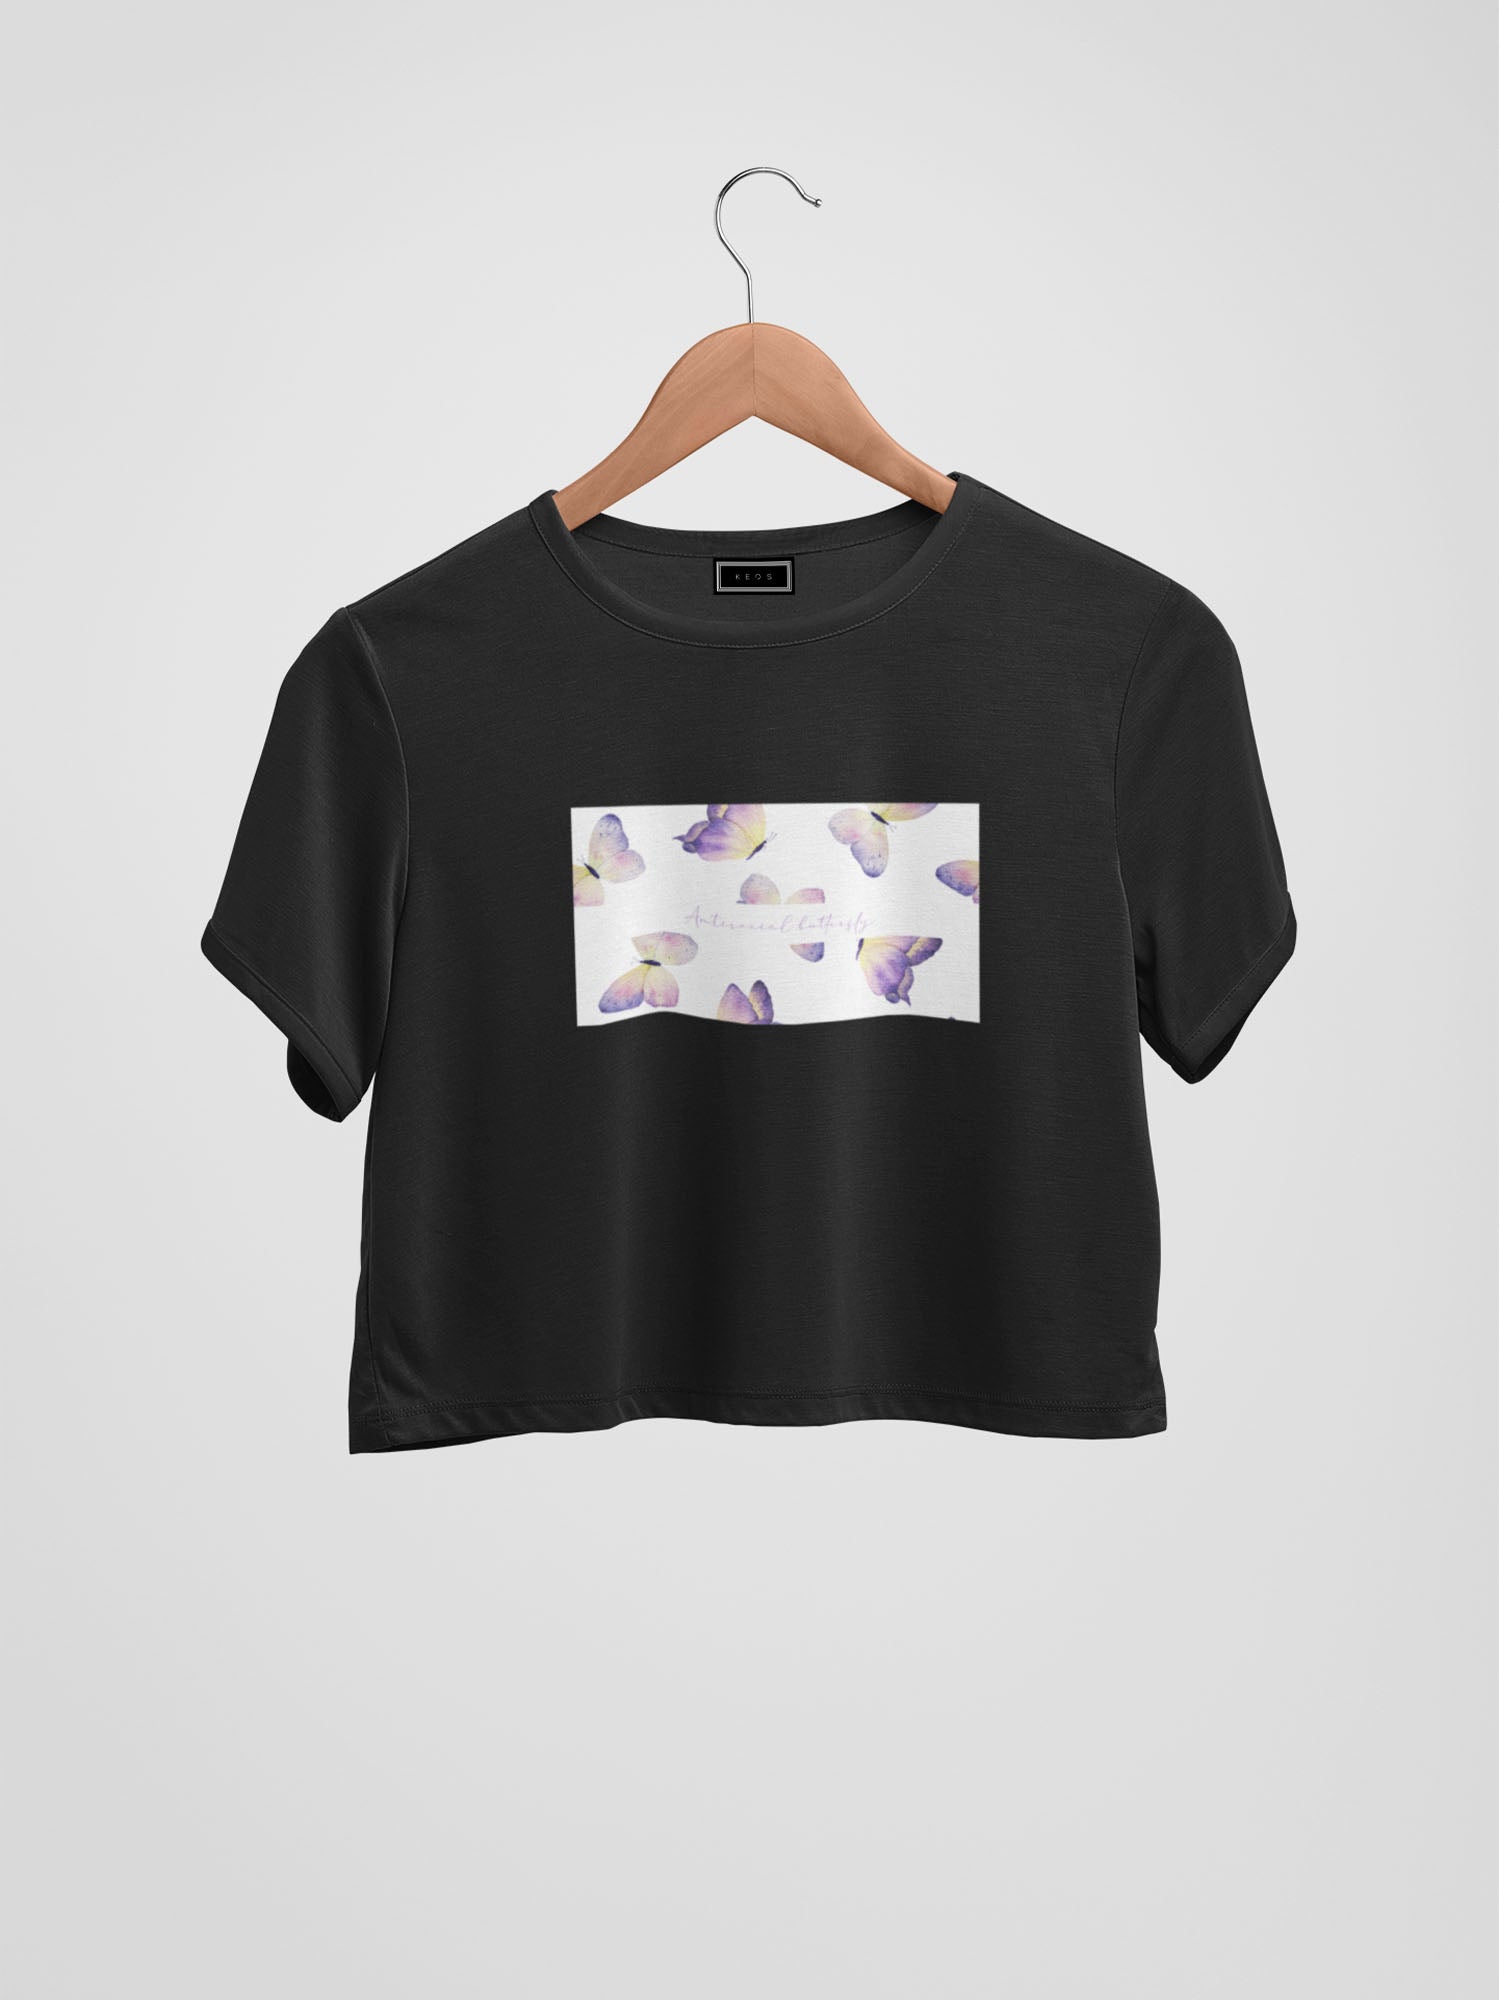 Antisocial Butterfly Organic Cotton Crop Top - keos.life